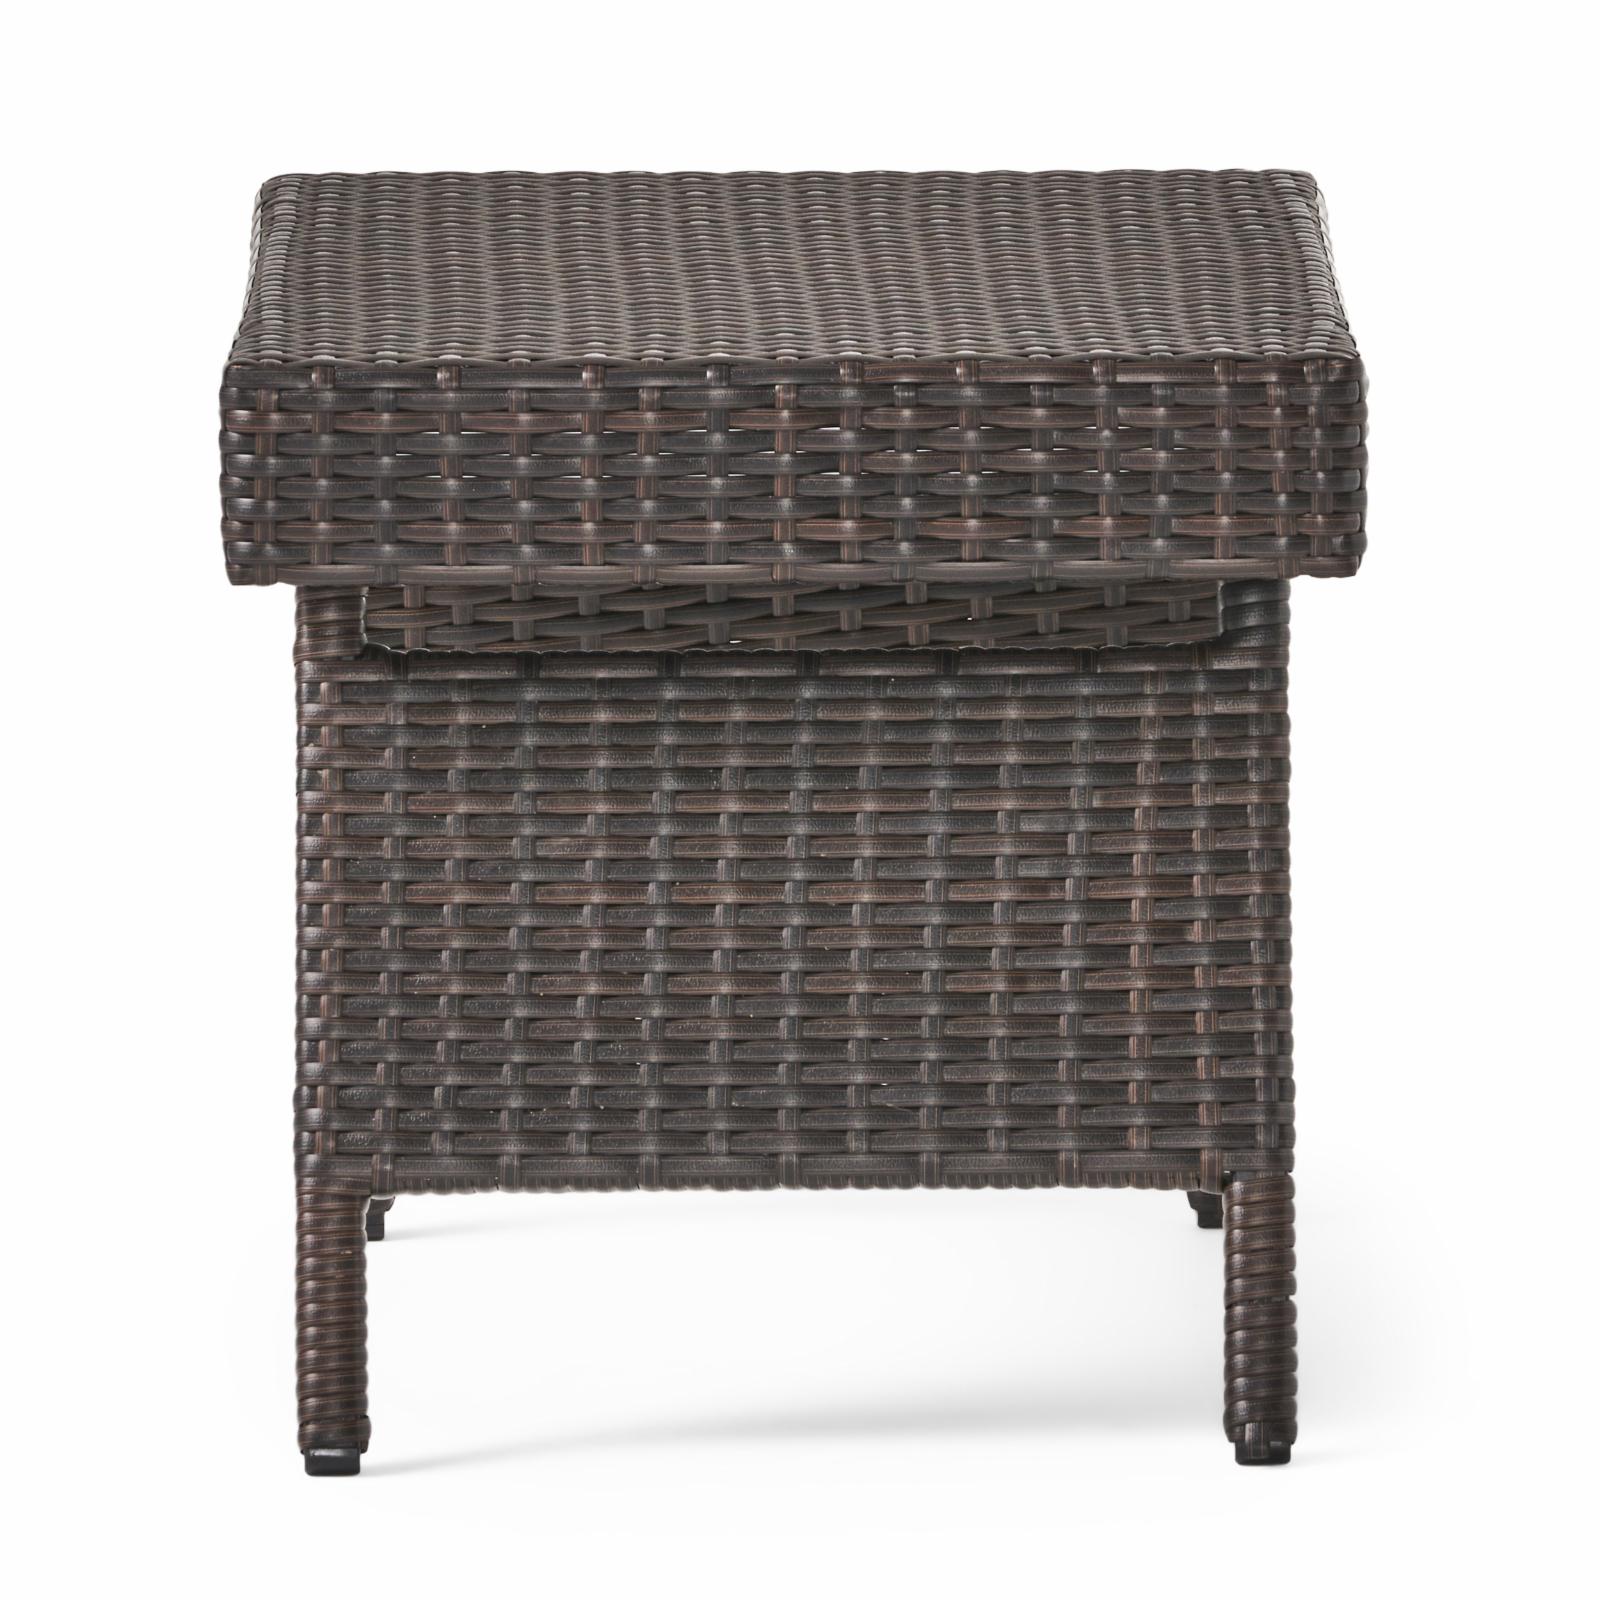 Christopher Knight Home Salem Outdoor Brown Wicker Adjustable Folding Table by  - 16.00 W x 24.00 L x 15.75 H Brown - image 3 of 8